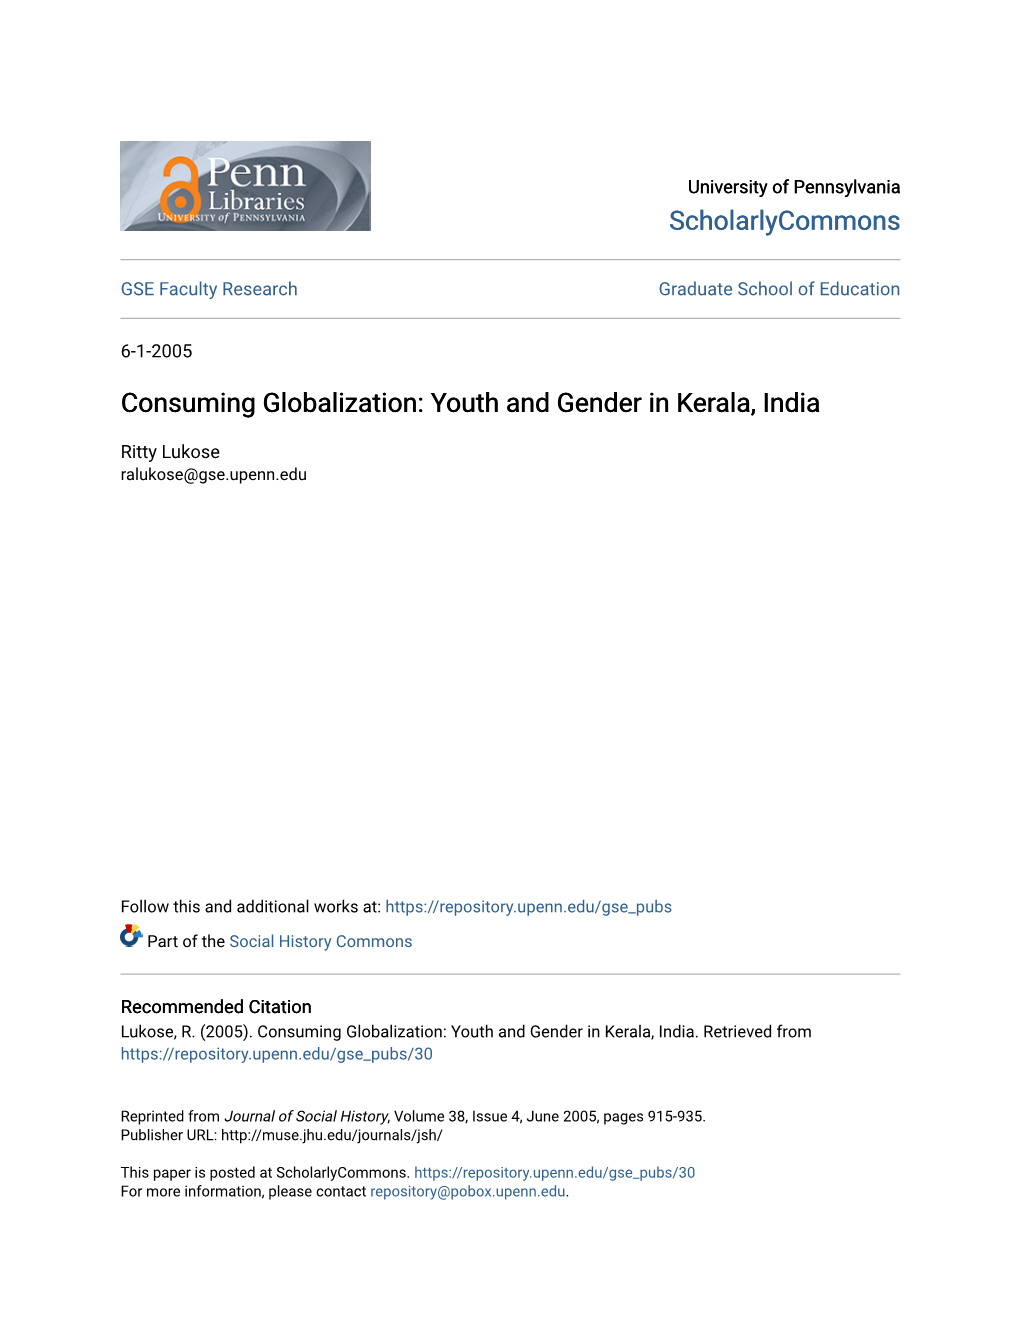 Consuming Globalization: Youth and Gender in Kerala, India